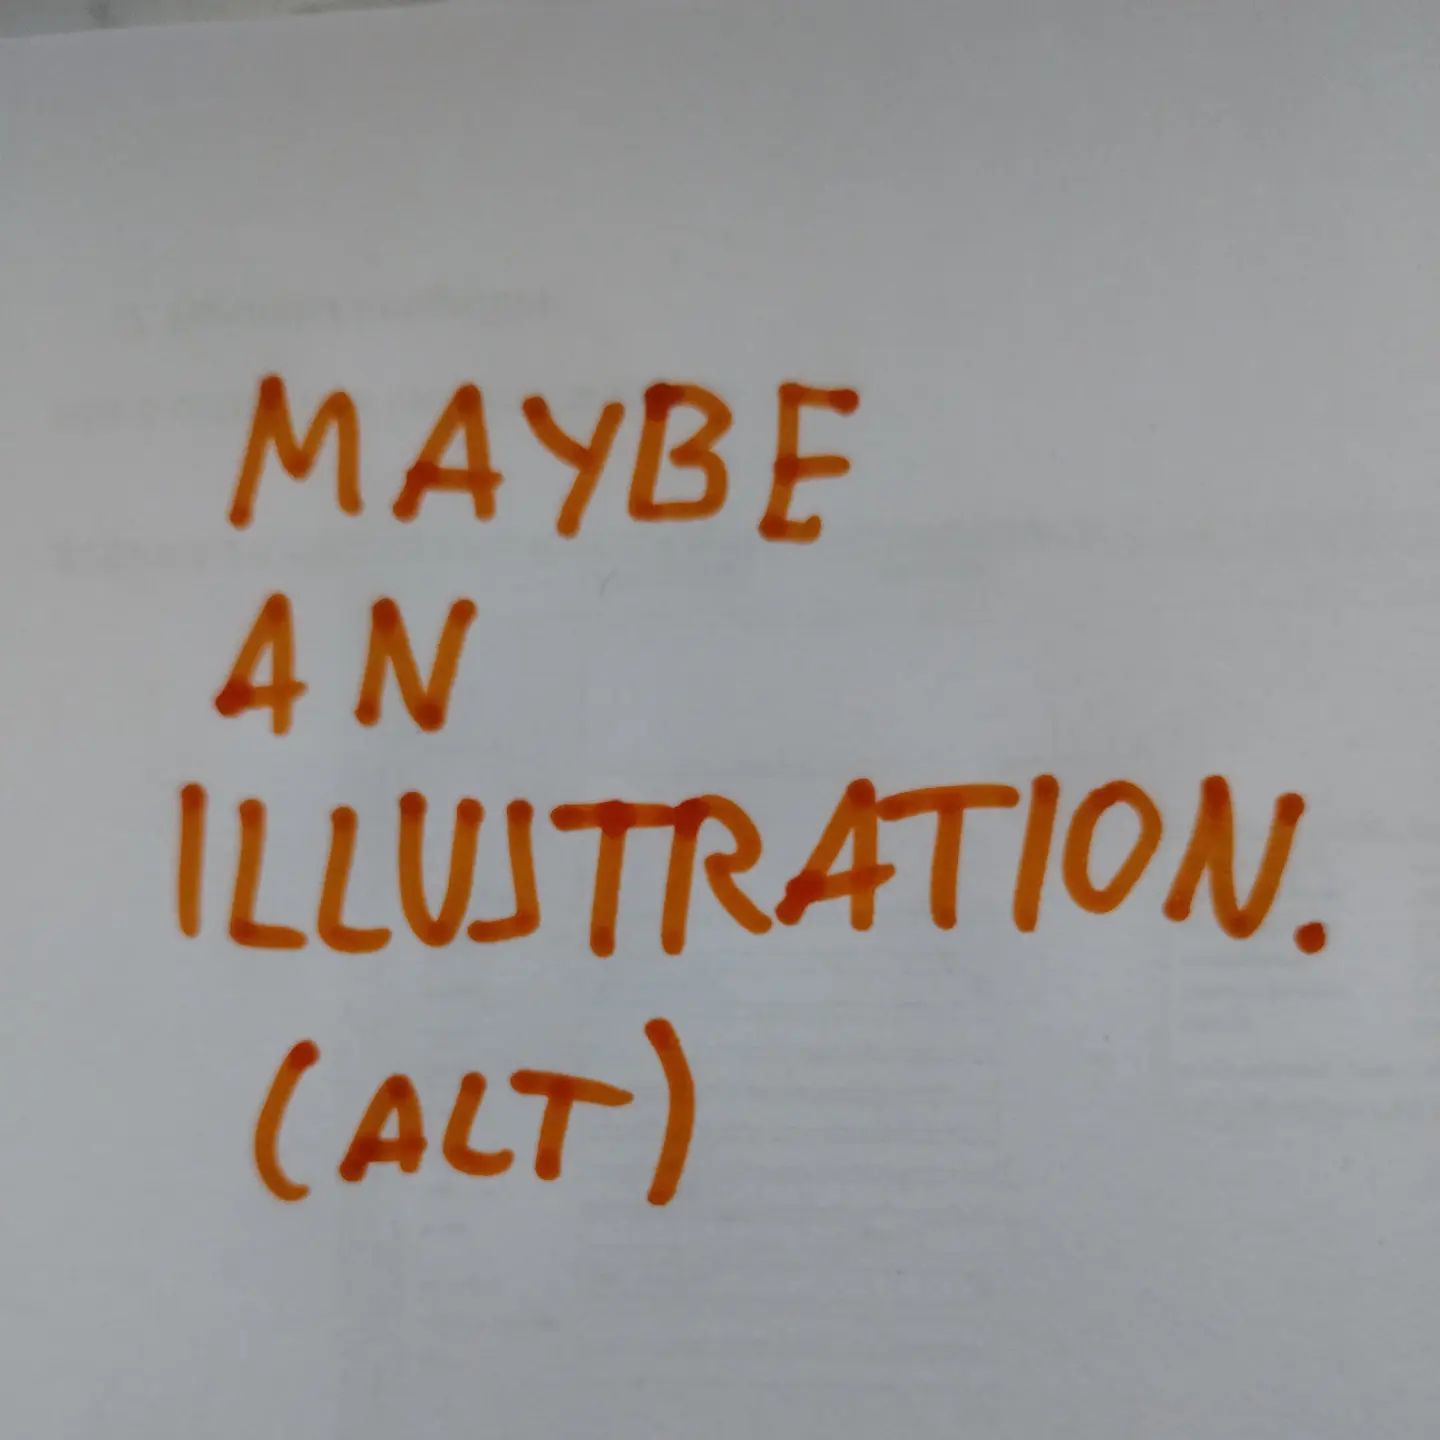 Photo of handwritten text on paper: Maybe an illustration.	(ALT)